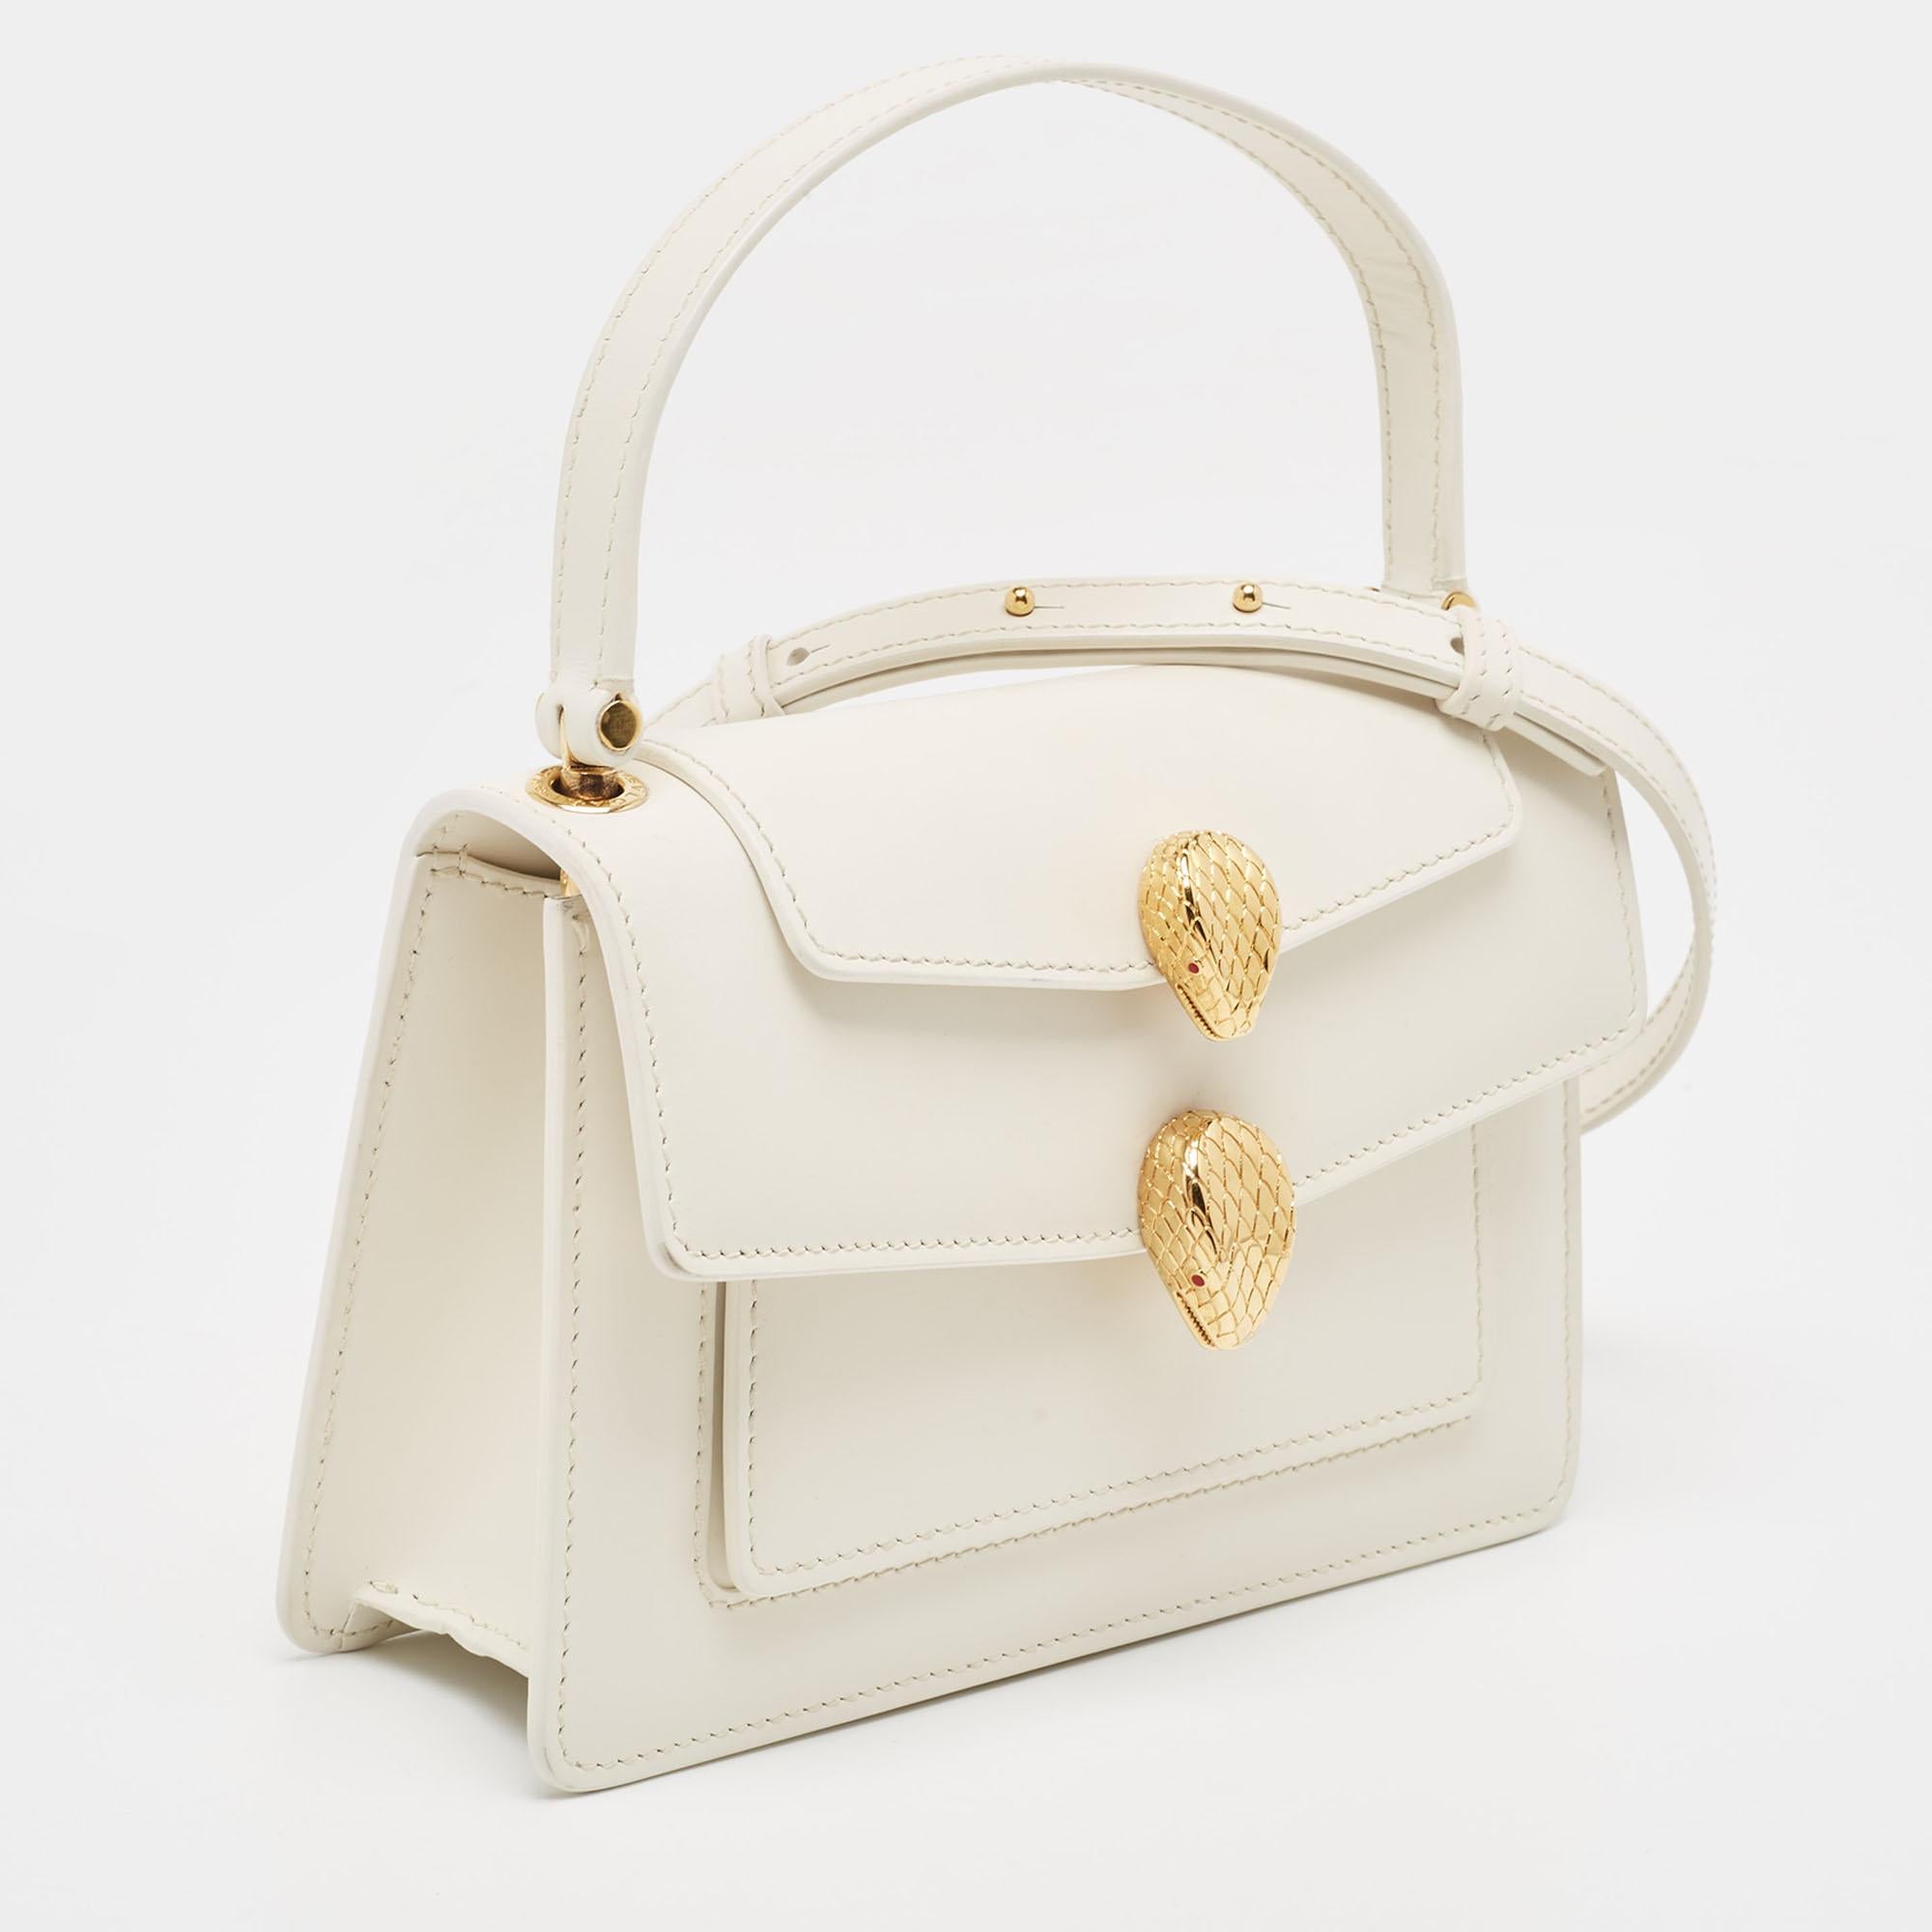 Perfect for conveniently housing your essentials in one place, this Bvlgari x Alexander Wang bag is a worthy investment. It has notable details and offers a look of luxury.

